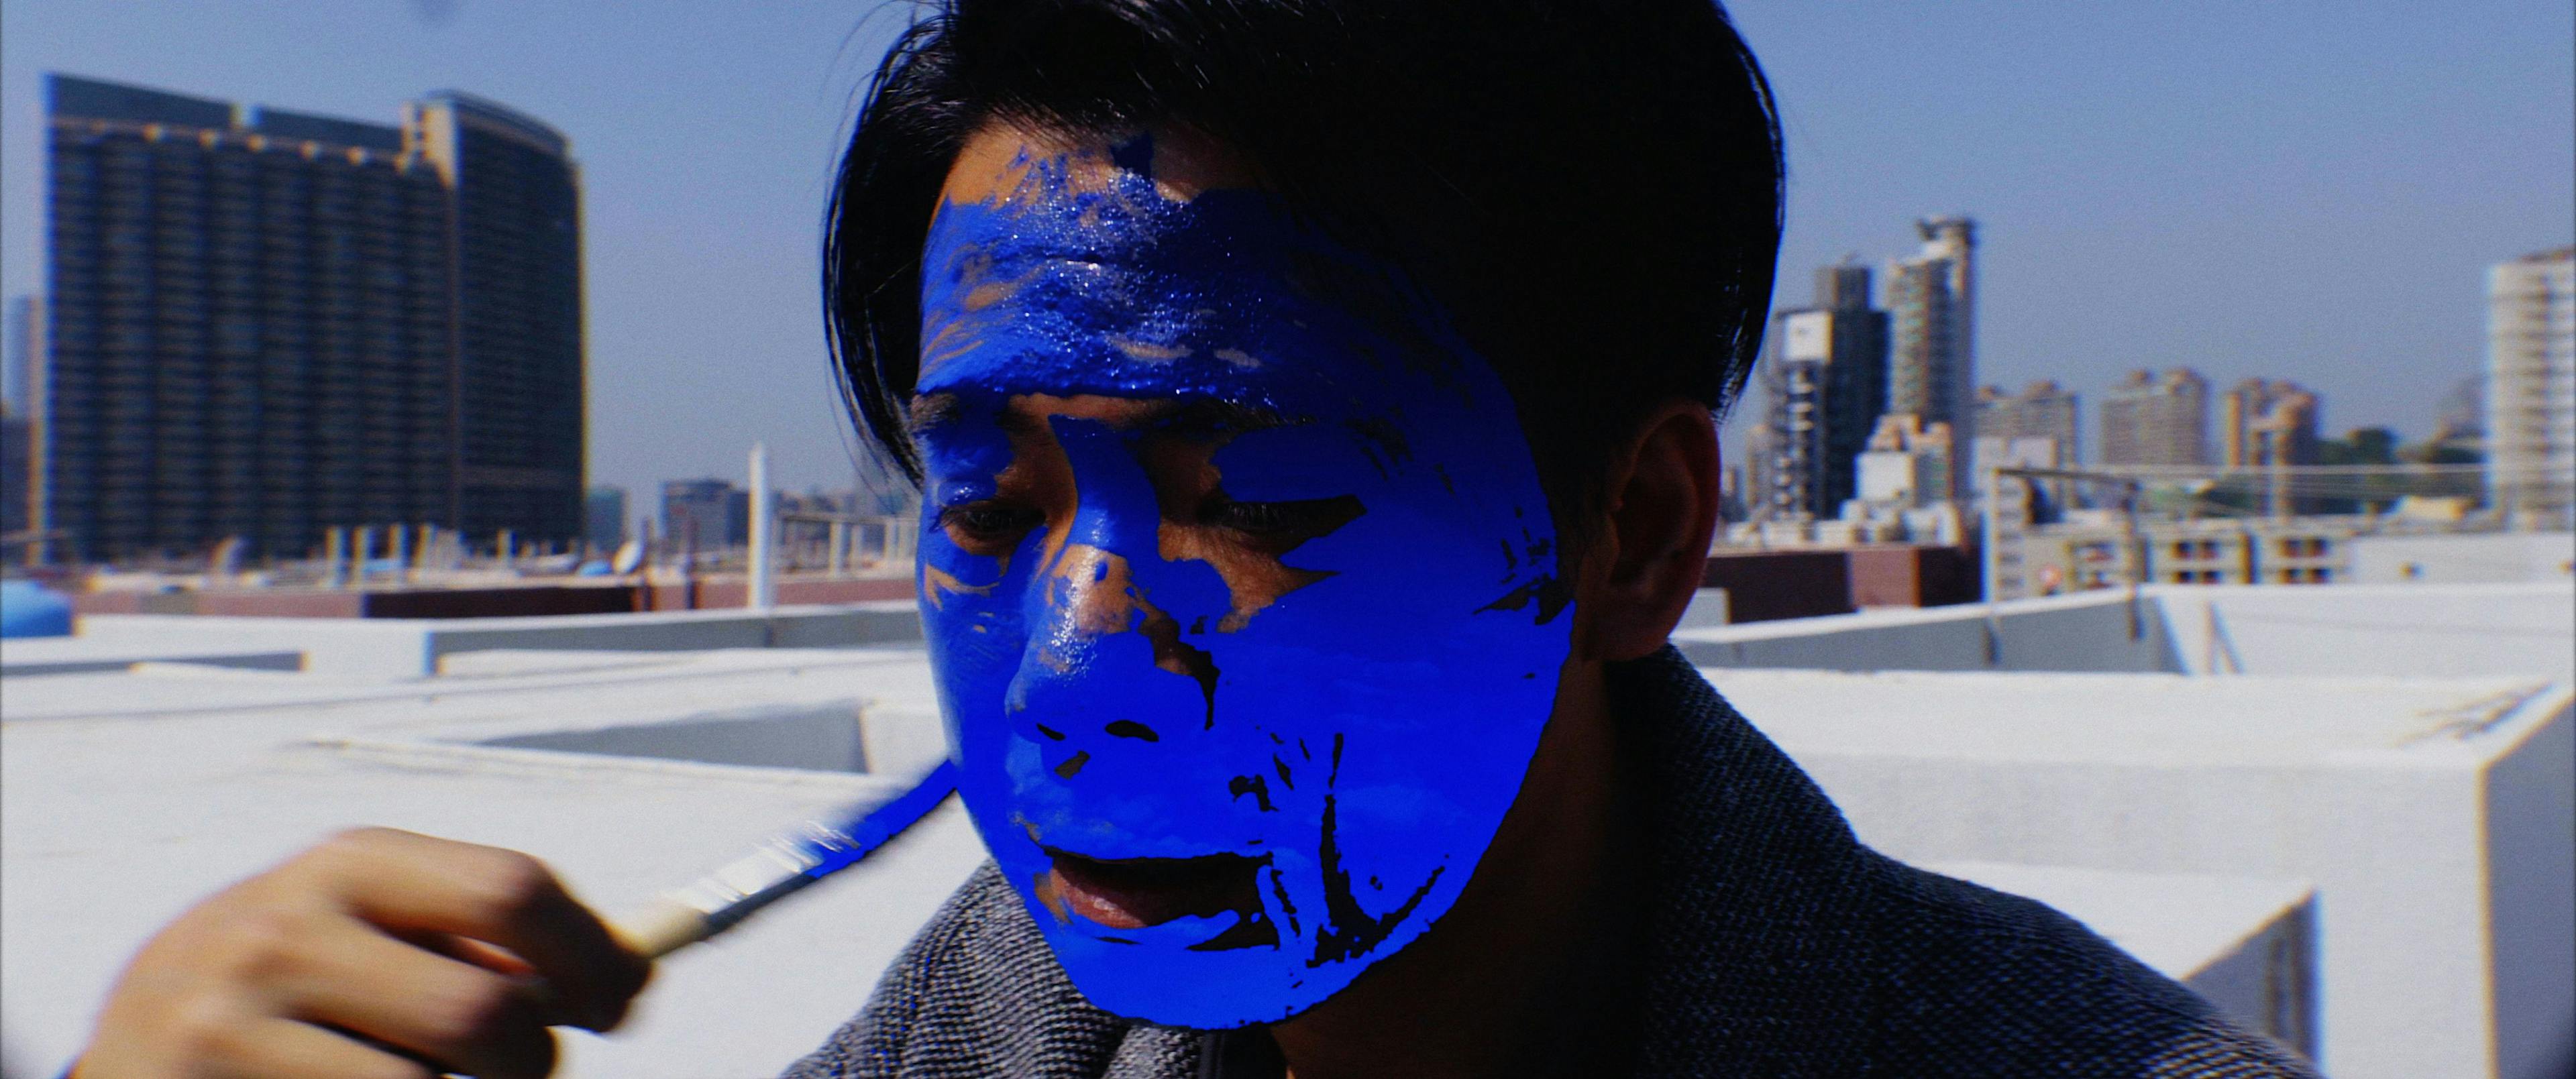 Close-up image of a person painting their face blue. In the background, there are many skyscrapers.